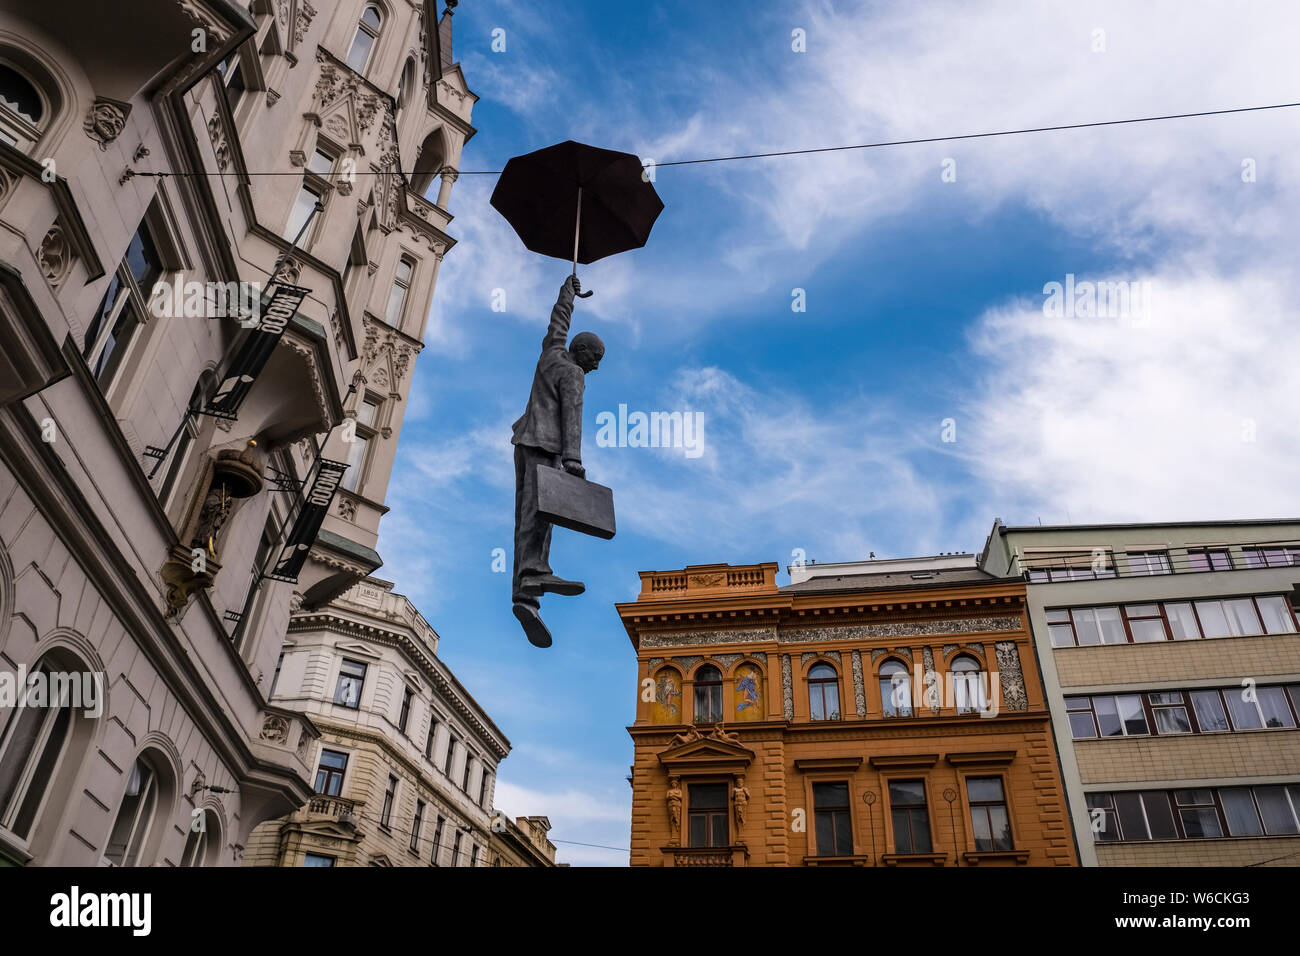 Streetart, the sculpture of a man with an umbrella floating in the air between buildings Stock Photo